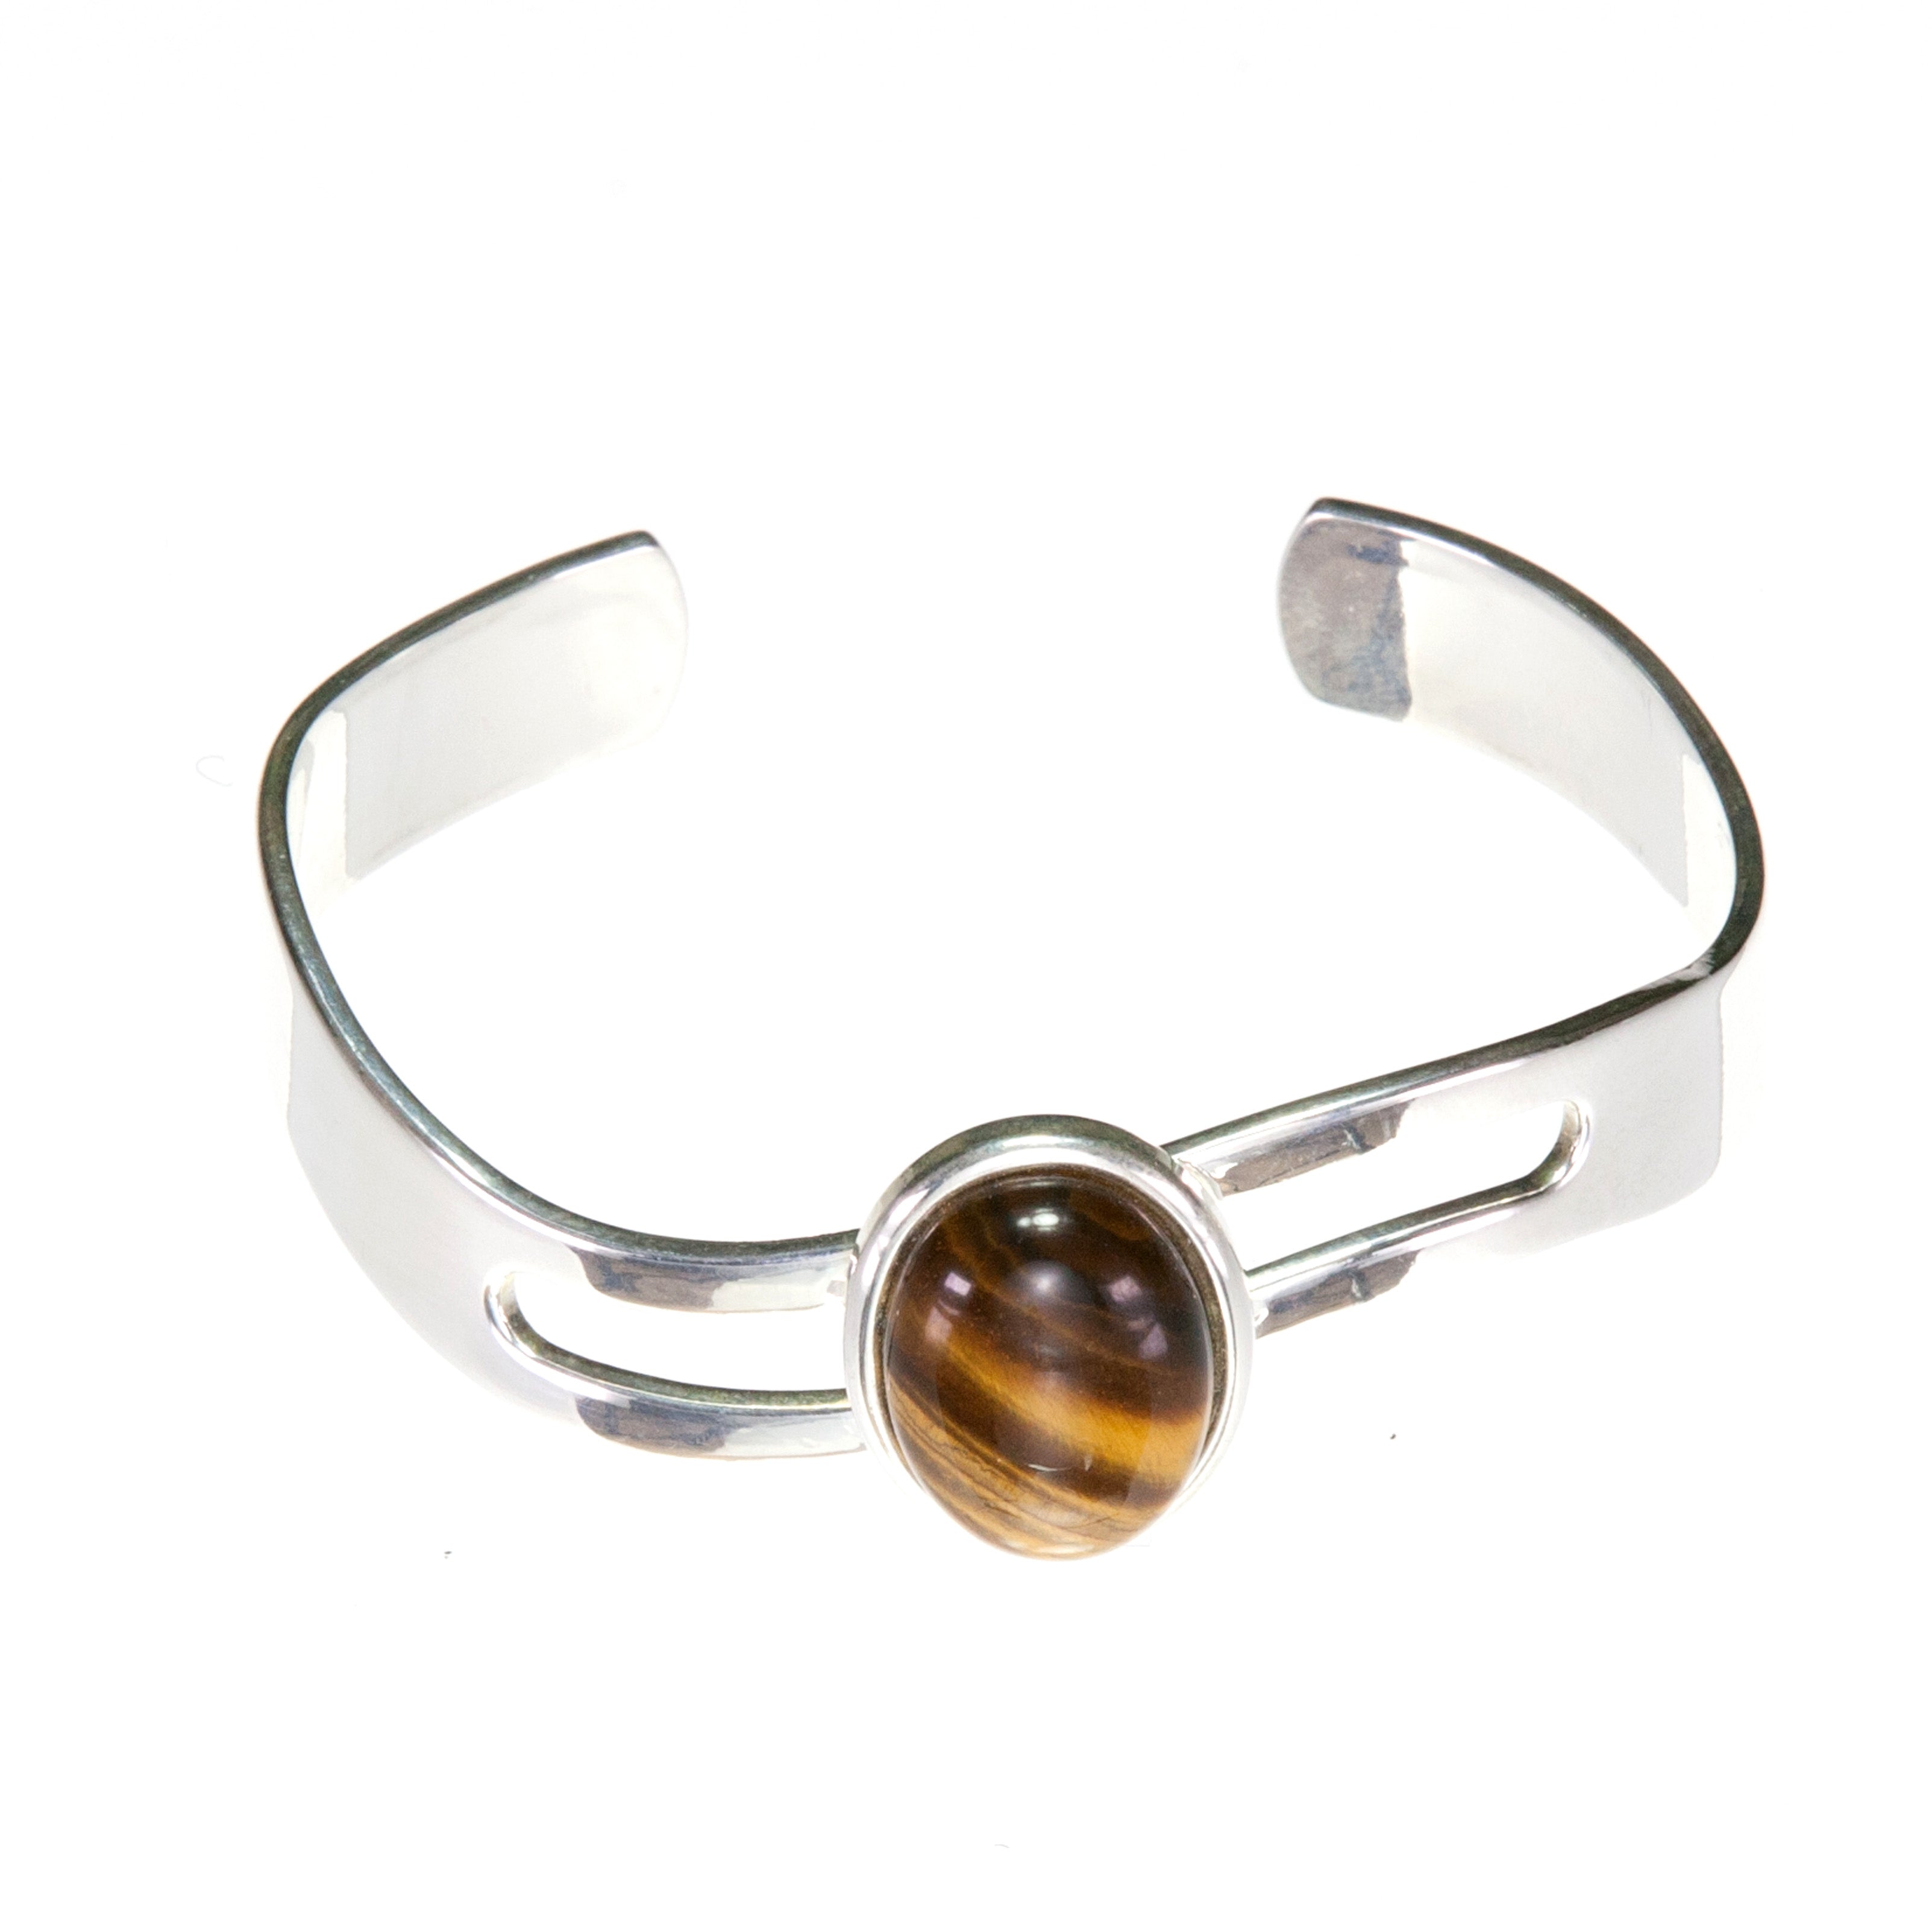 Adjustable Bangle with flattering wave shaped adjustable cuff and large Golden Brown Tiger's Eye Cabochon